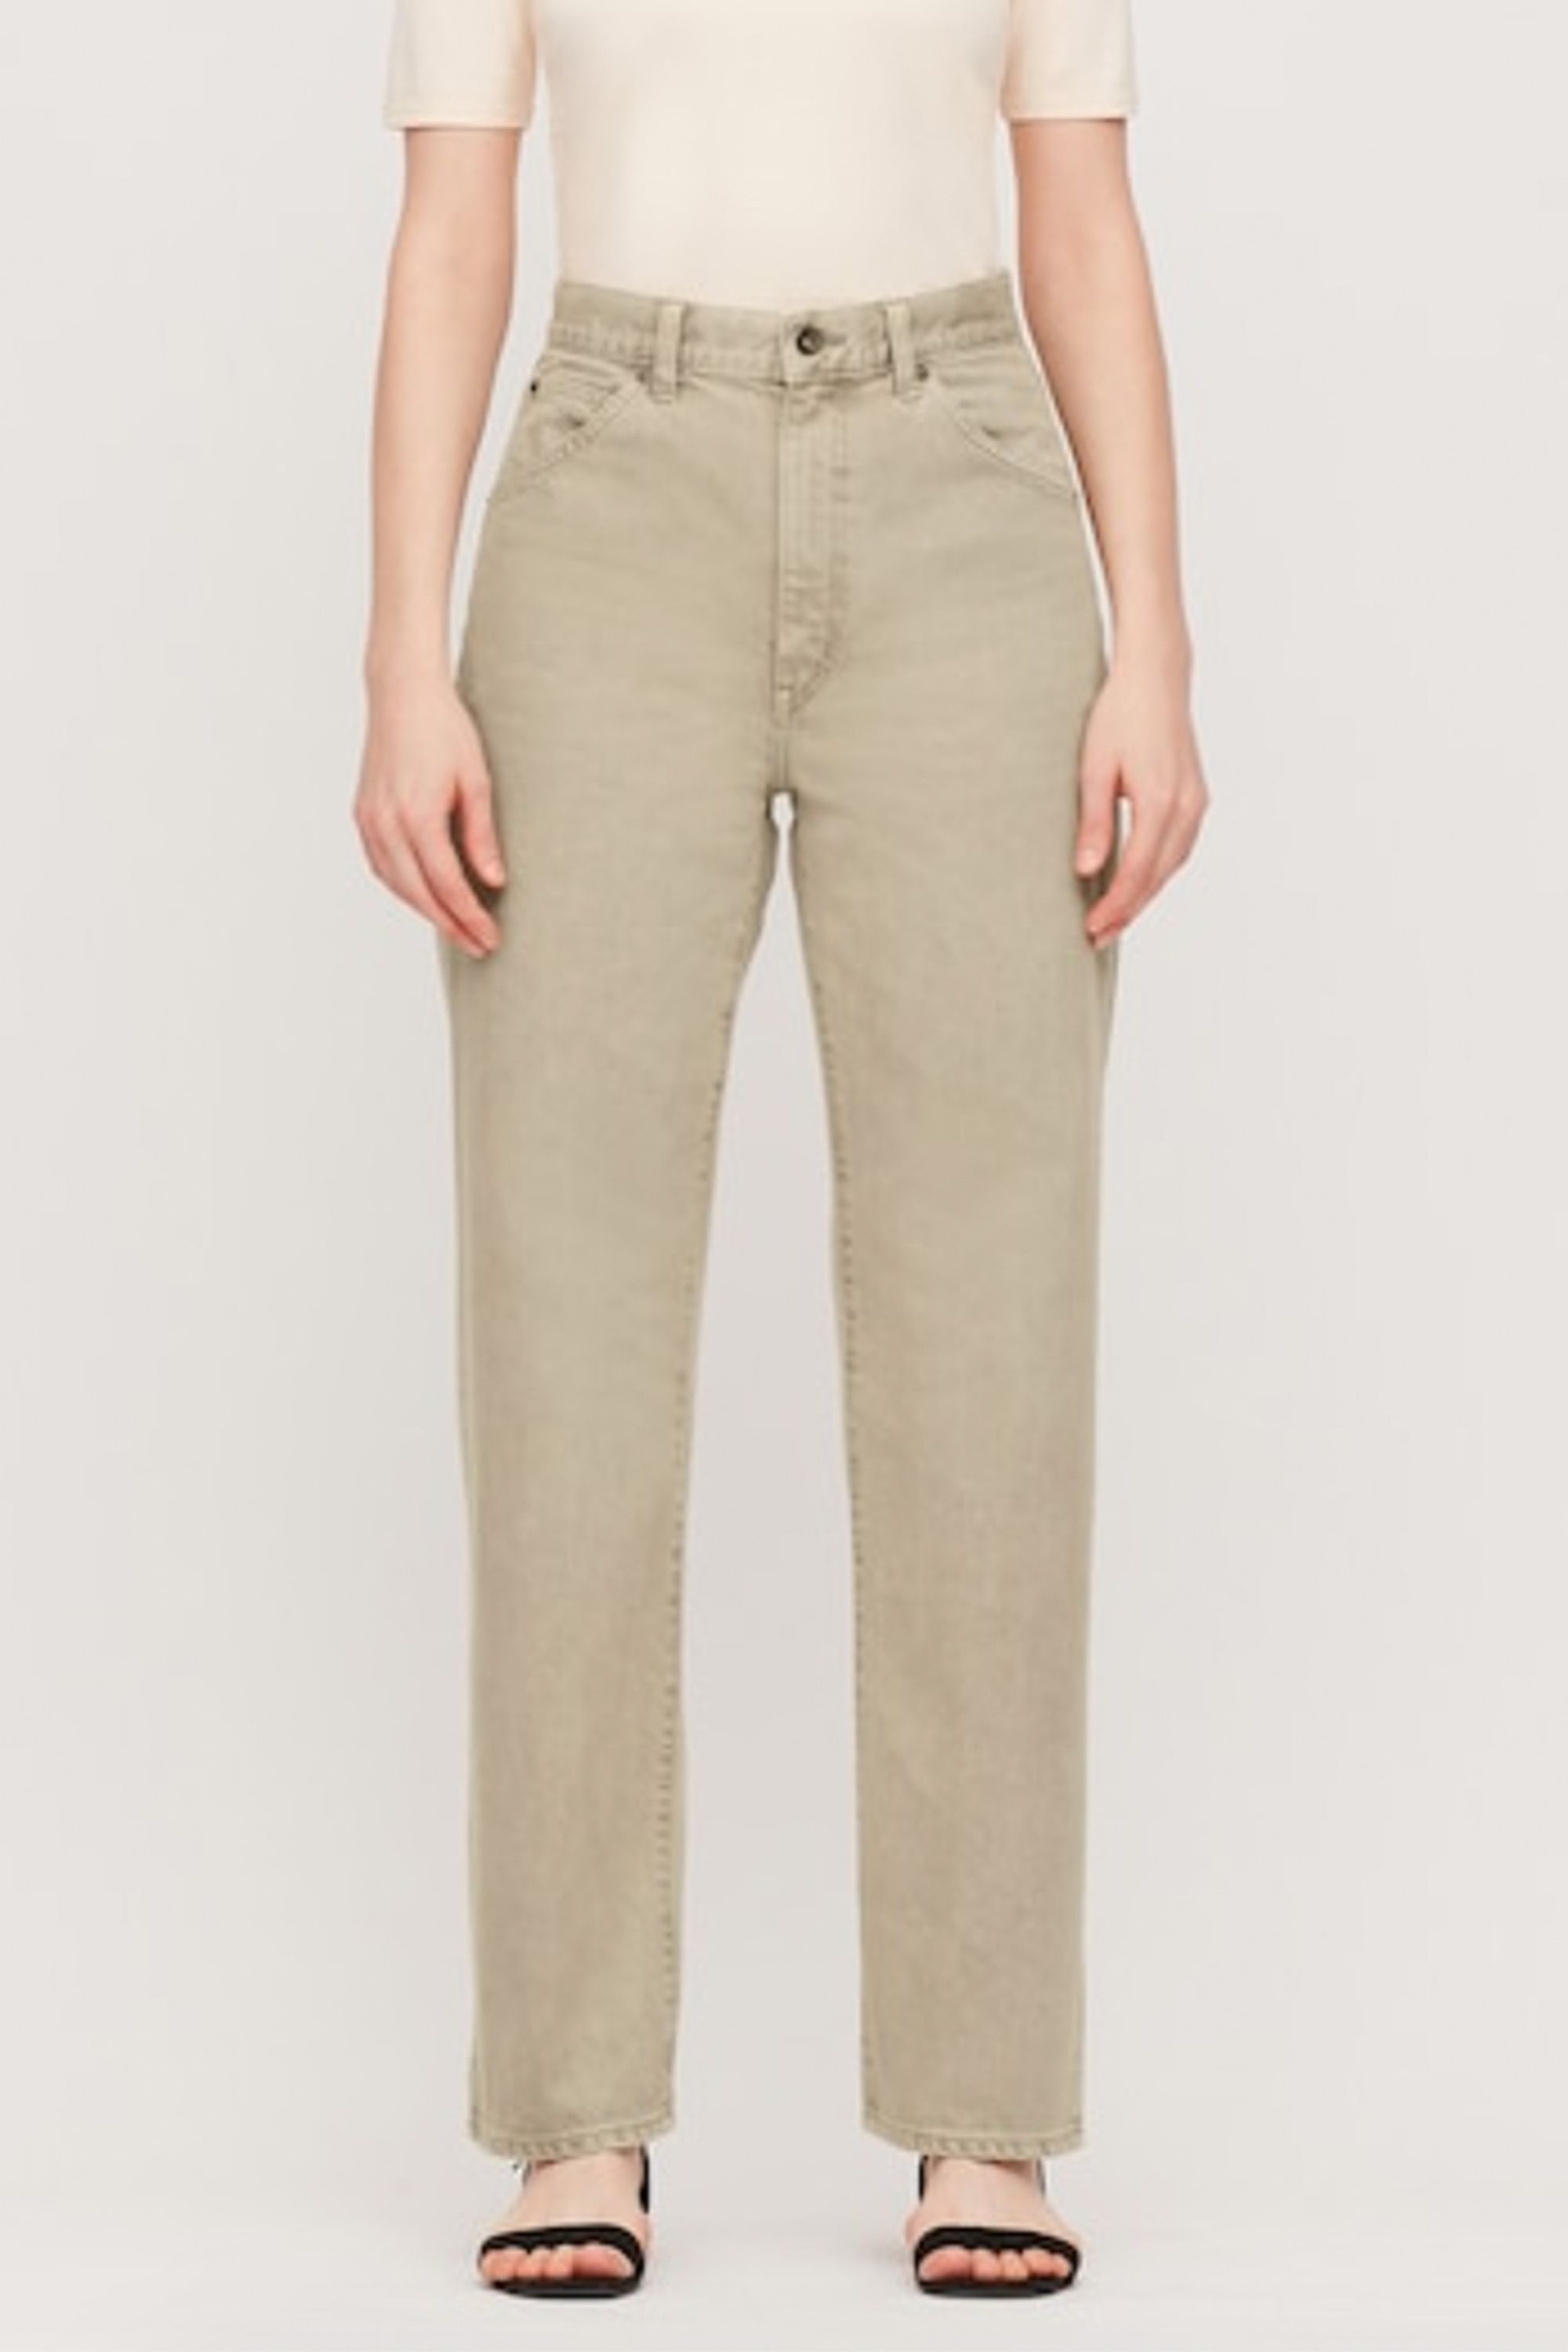 inexpensive mom jeans